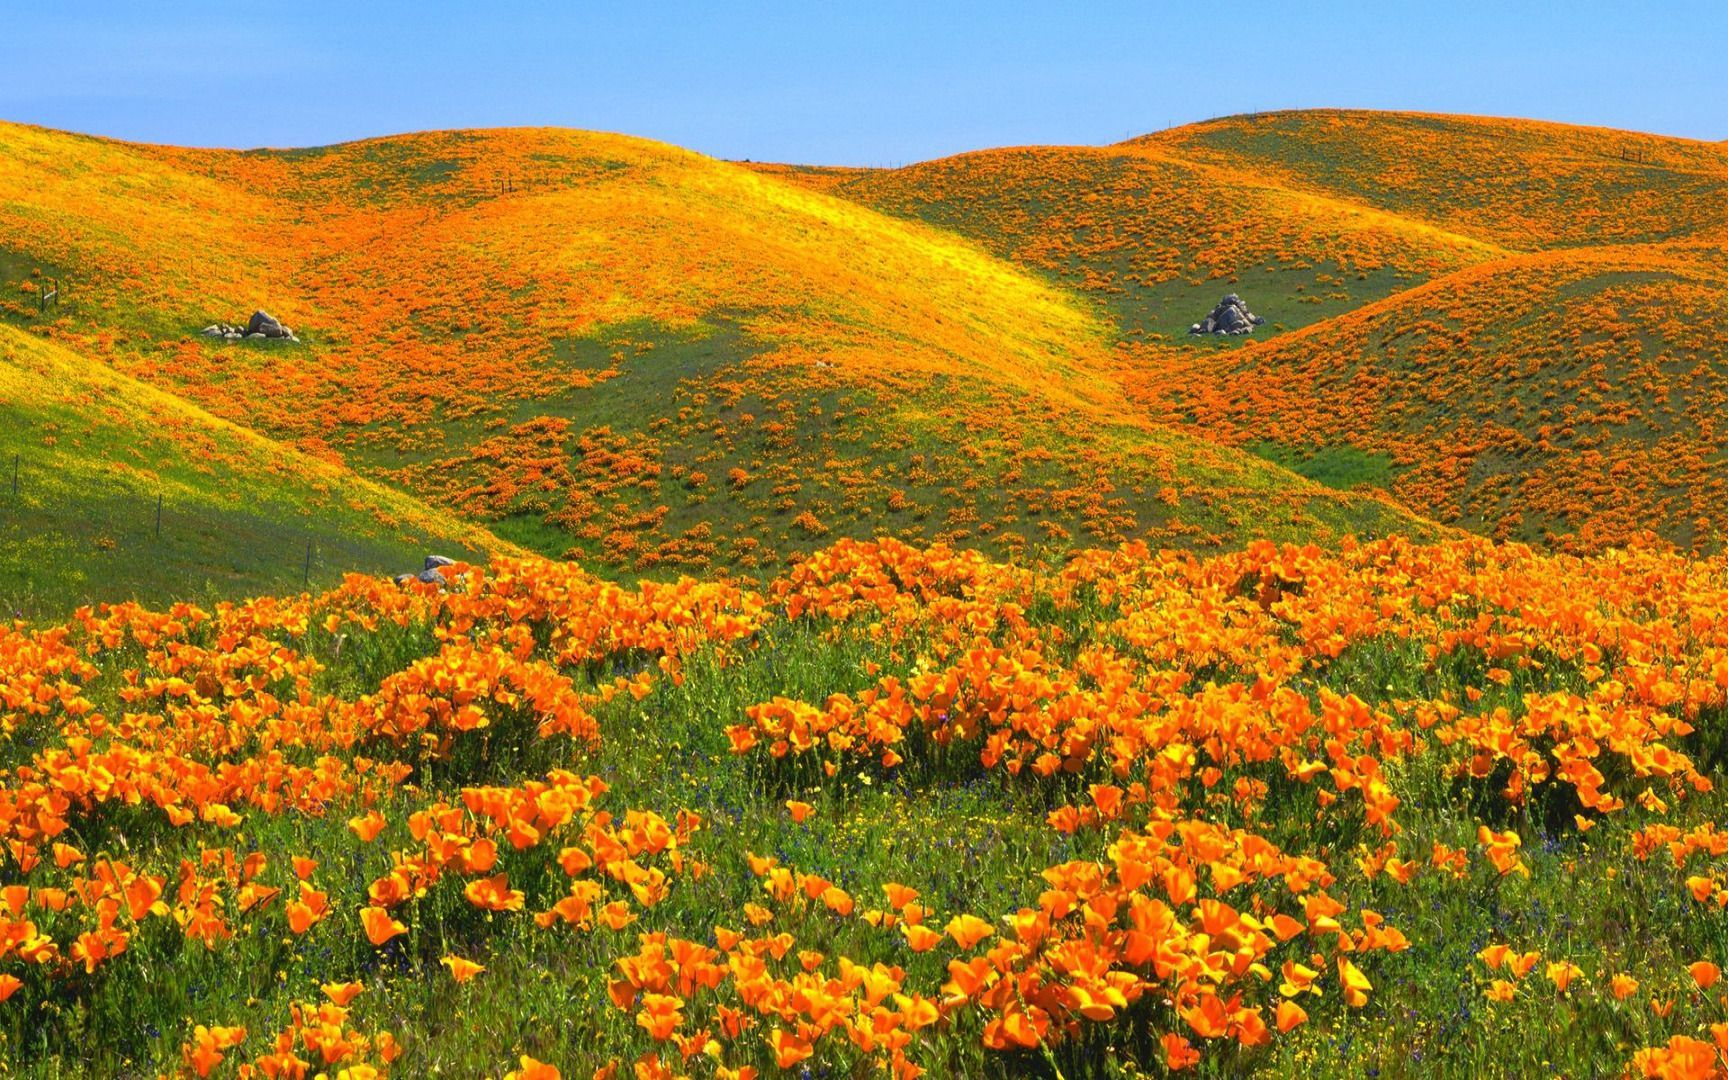 California poppies (state flower) in bloom and carpeting the hills